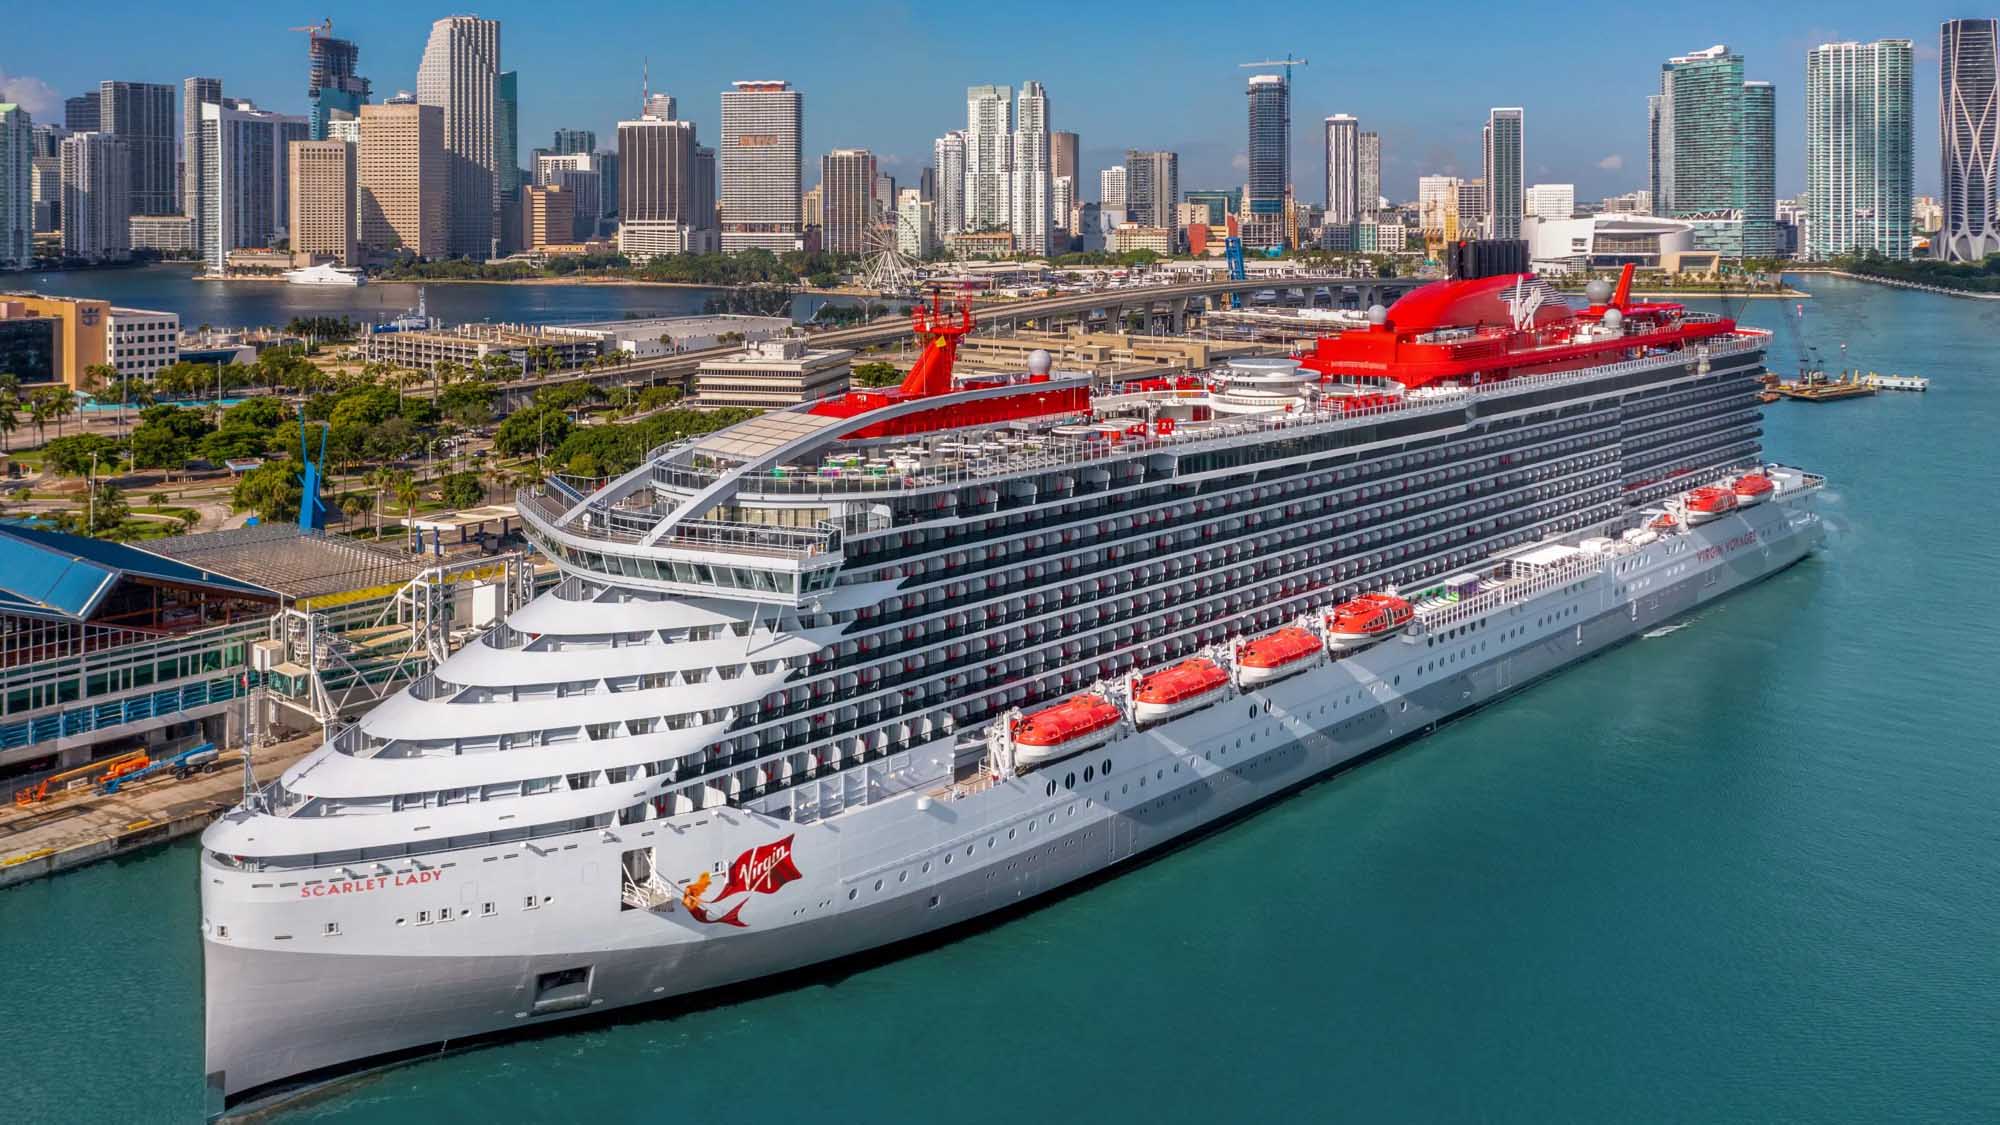 Scarlet Lady at Port of Miami